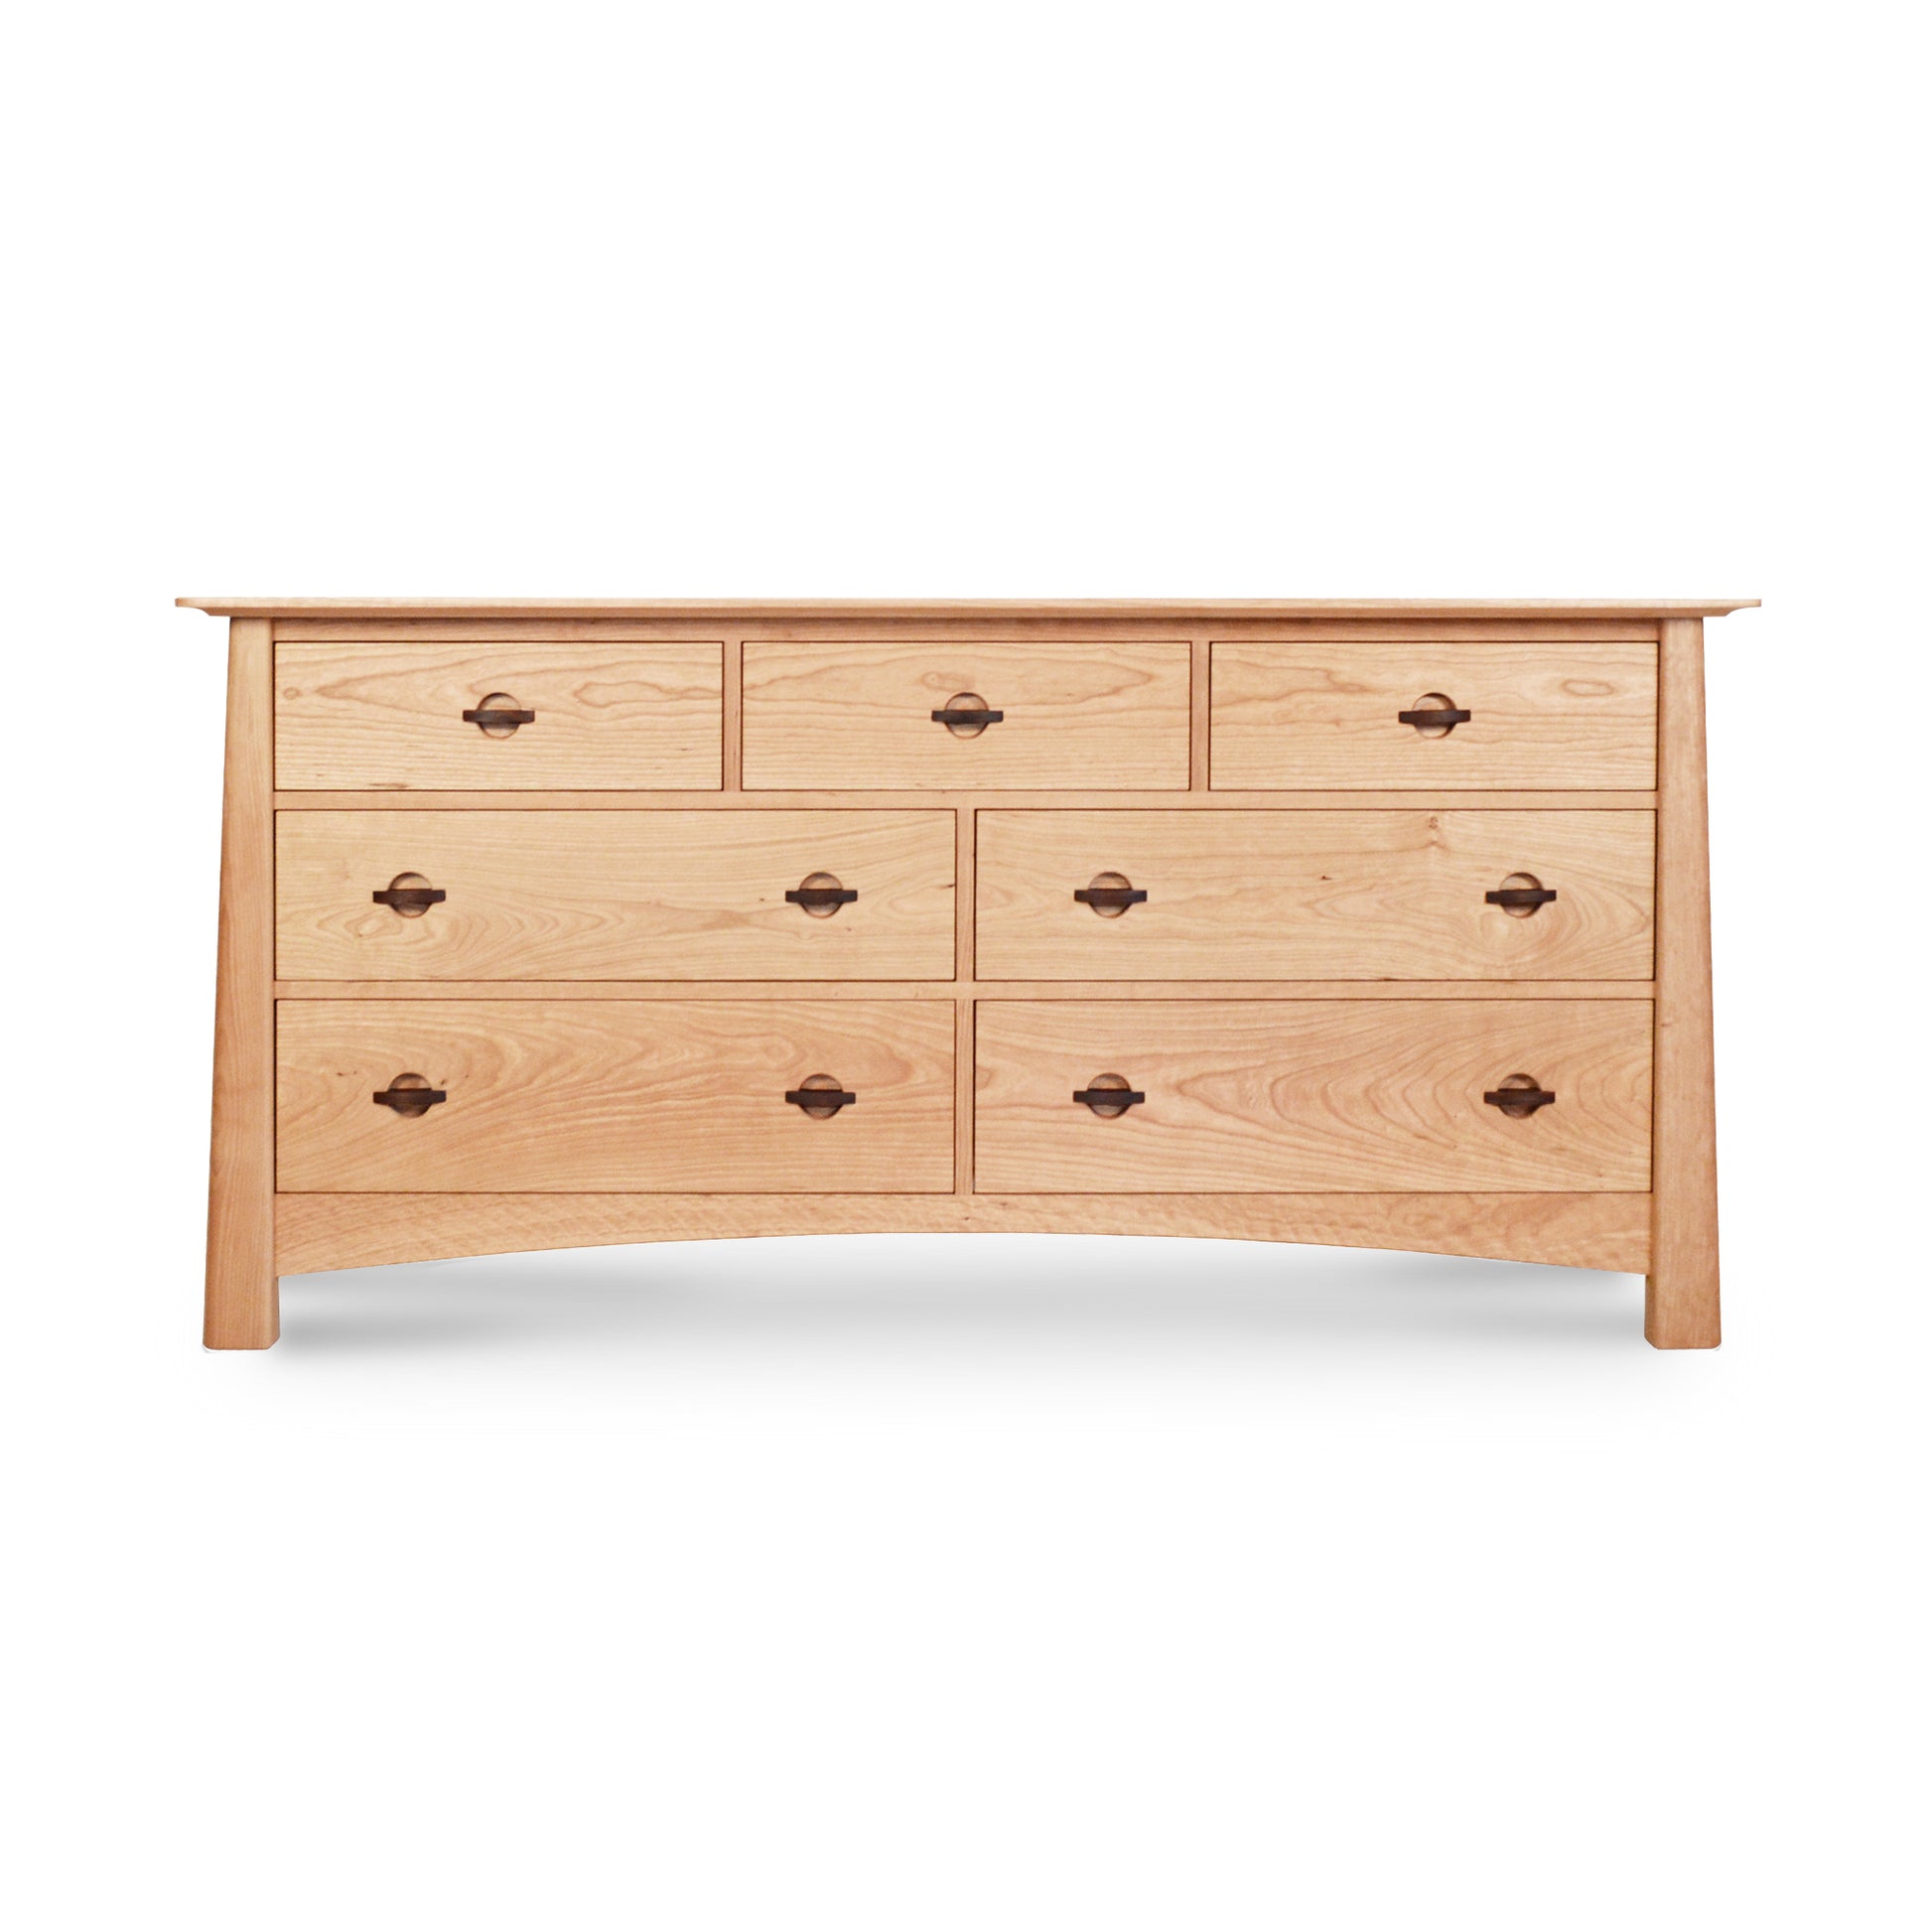 A Cherry Moon 7-Drawer Dresser by Maple Corner Woodworks with round handles, isolated on a white background.